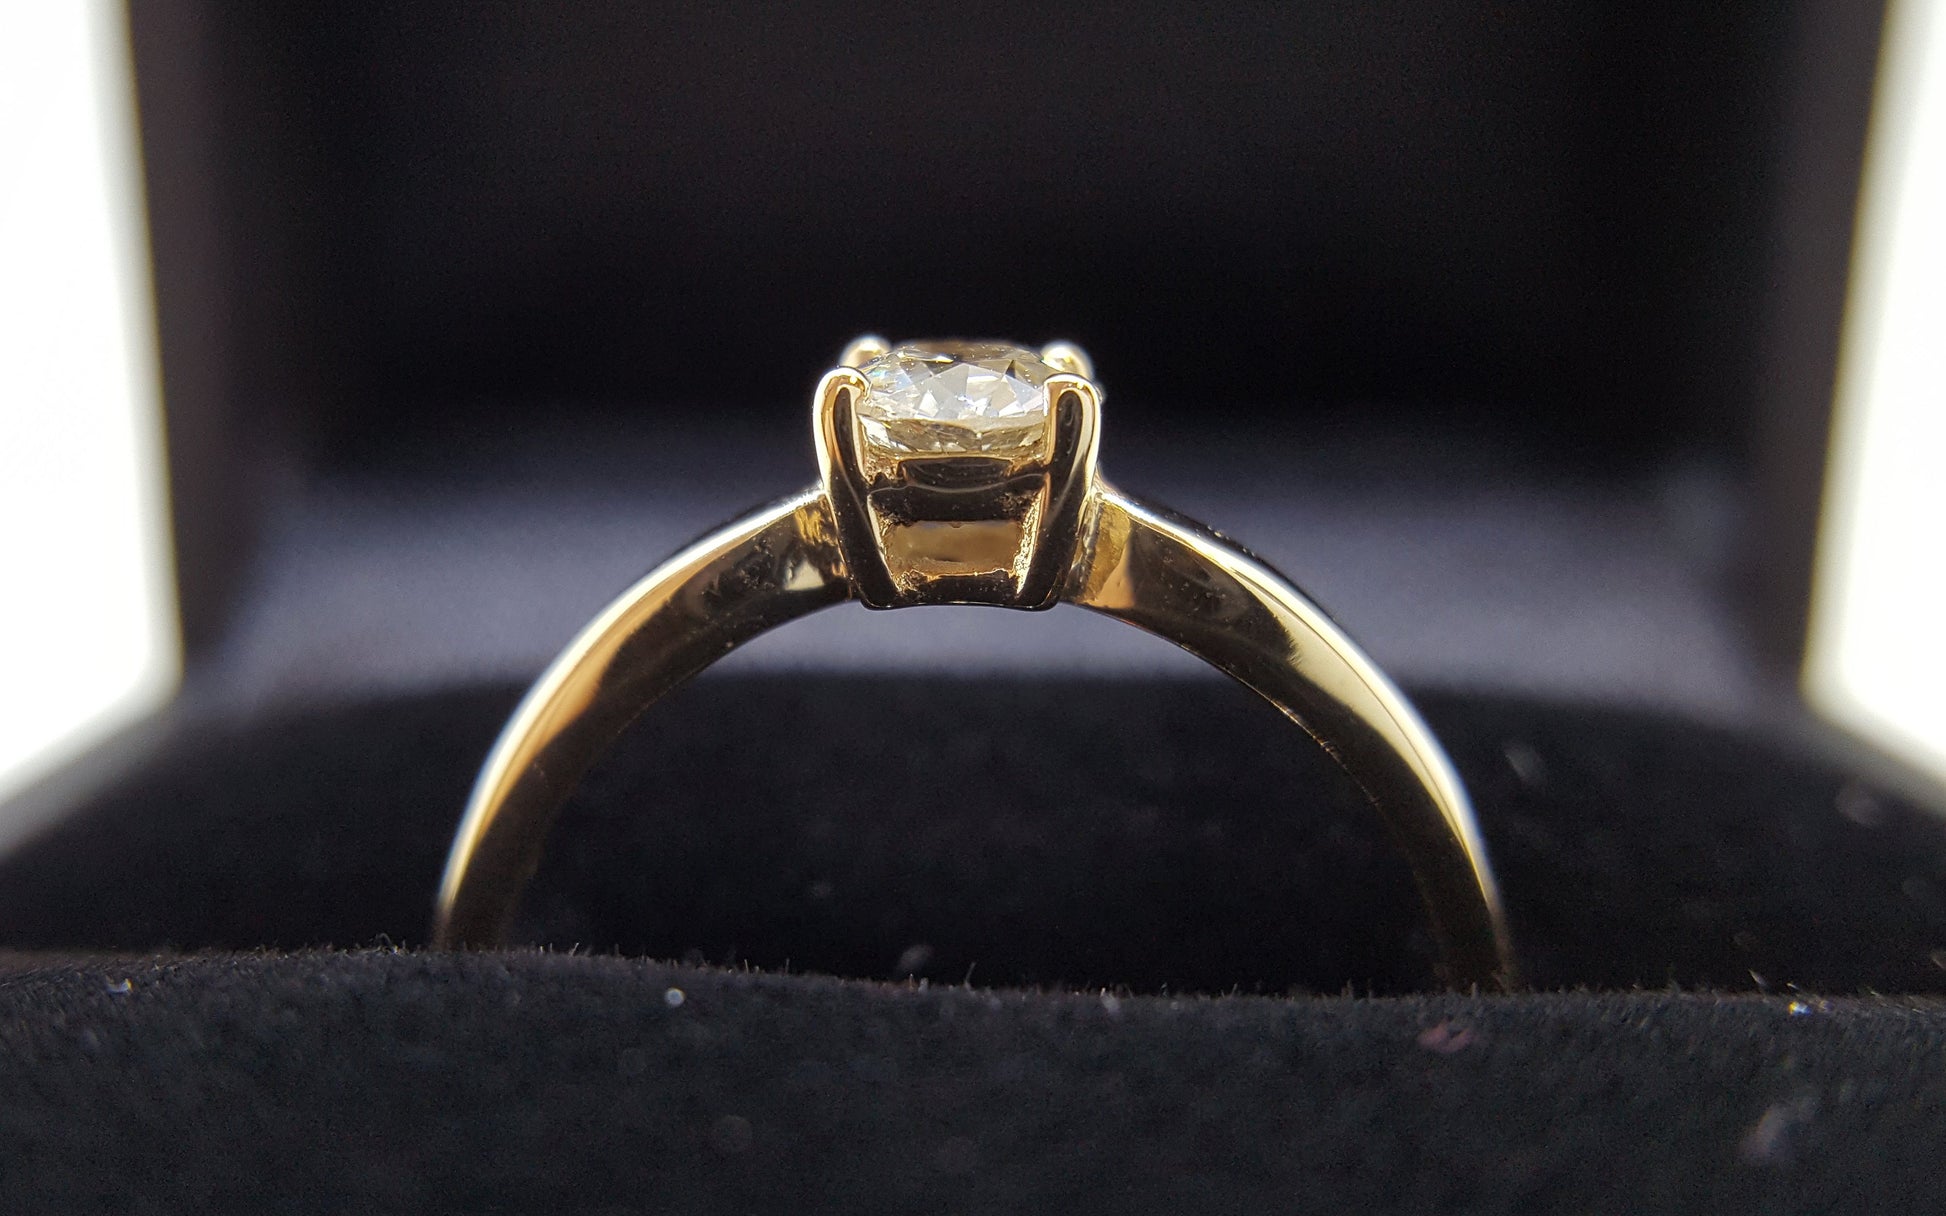 9 karat yellow gold four claw vintage design engagement ring with diamond